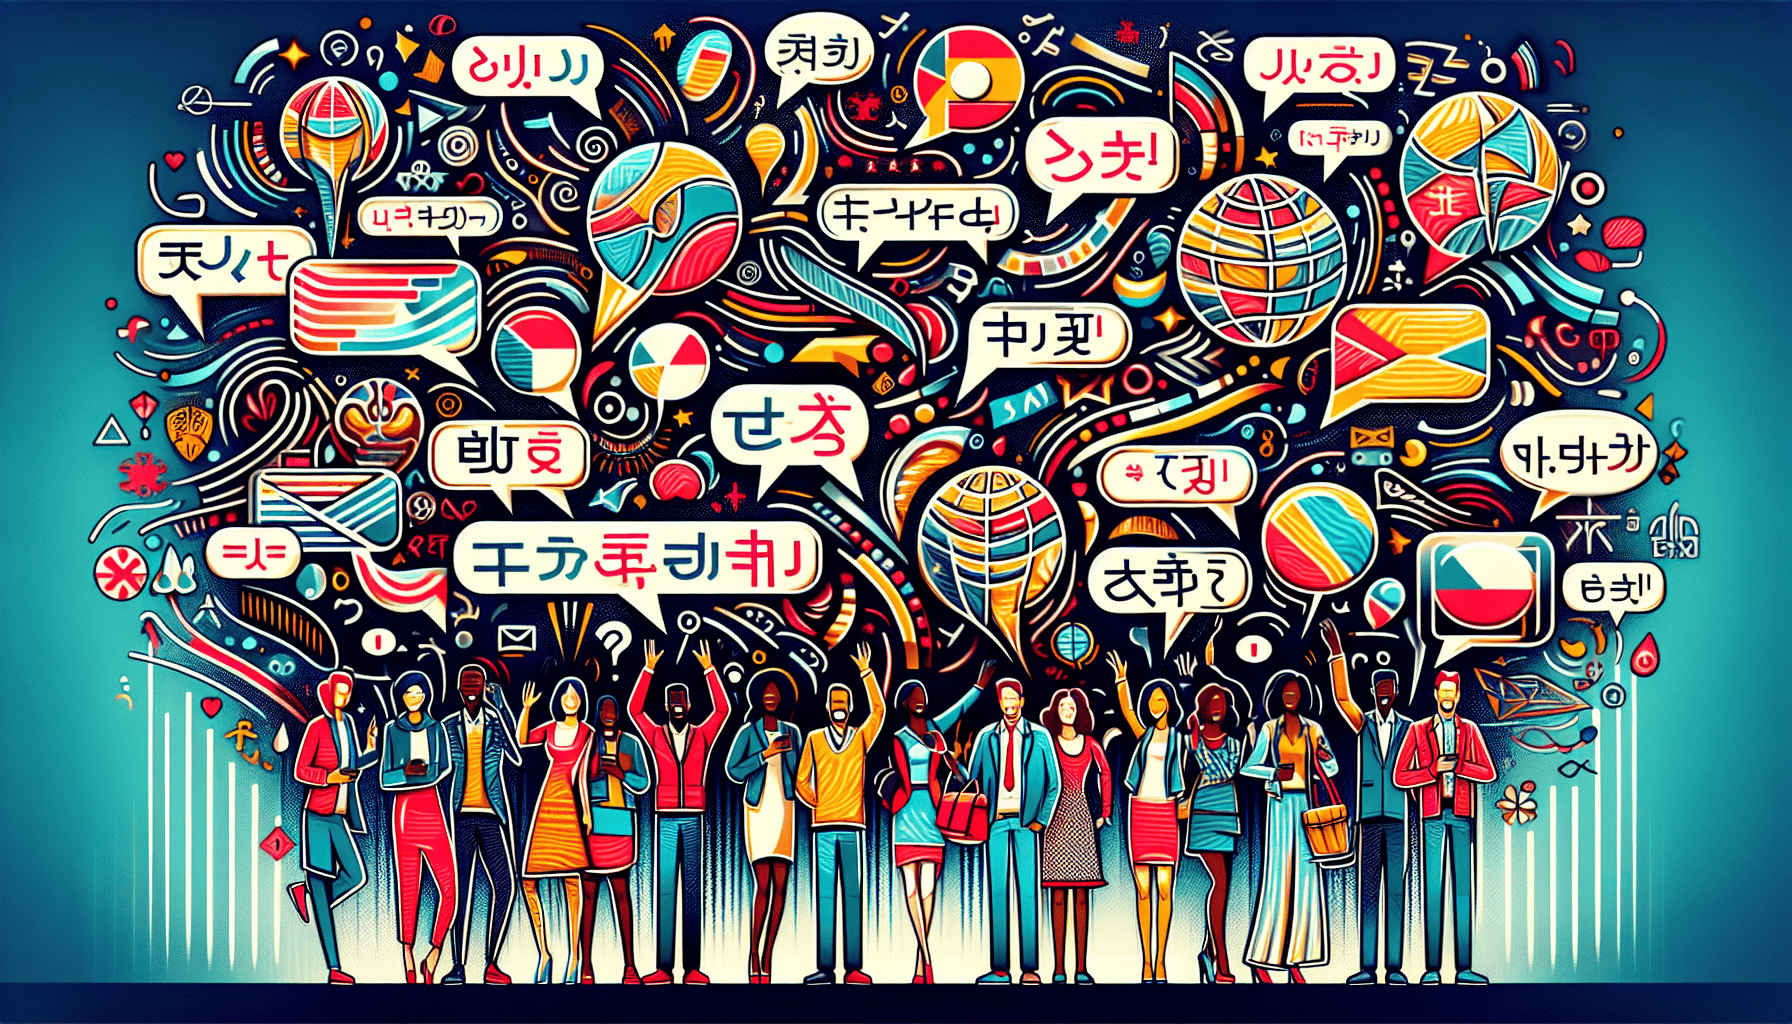 Illustration of language learning and cultural exchange through conversation